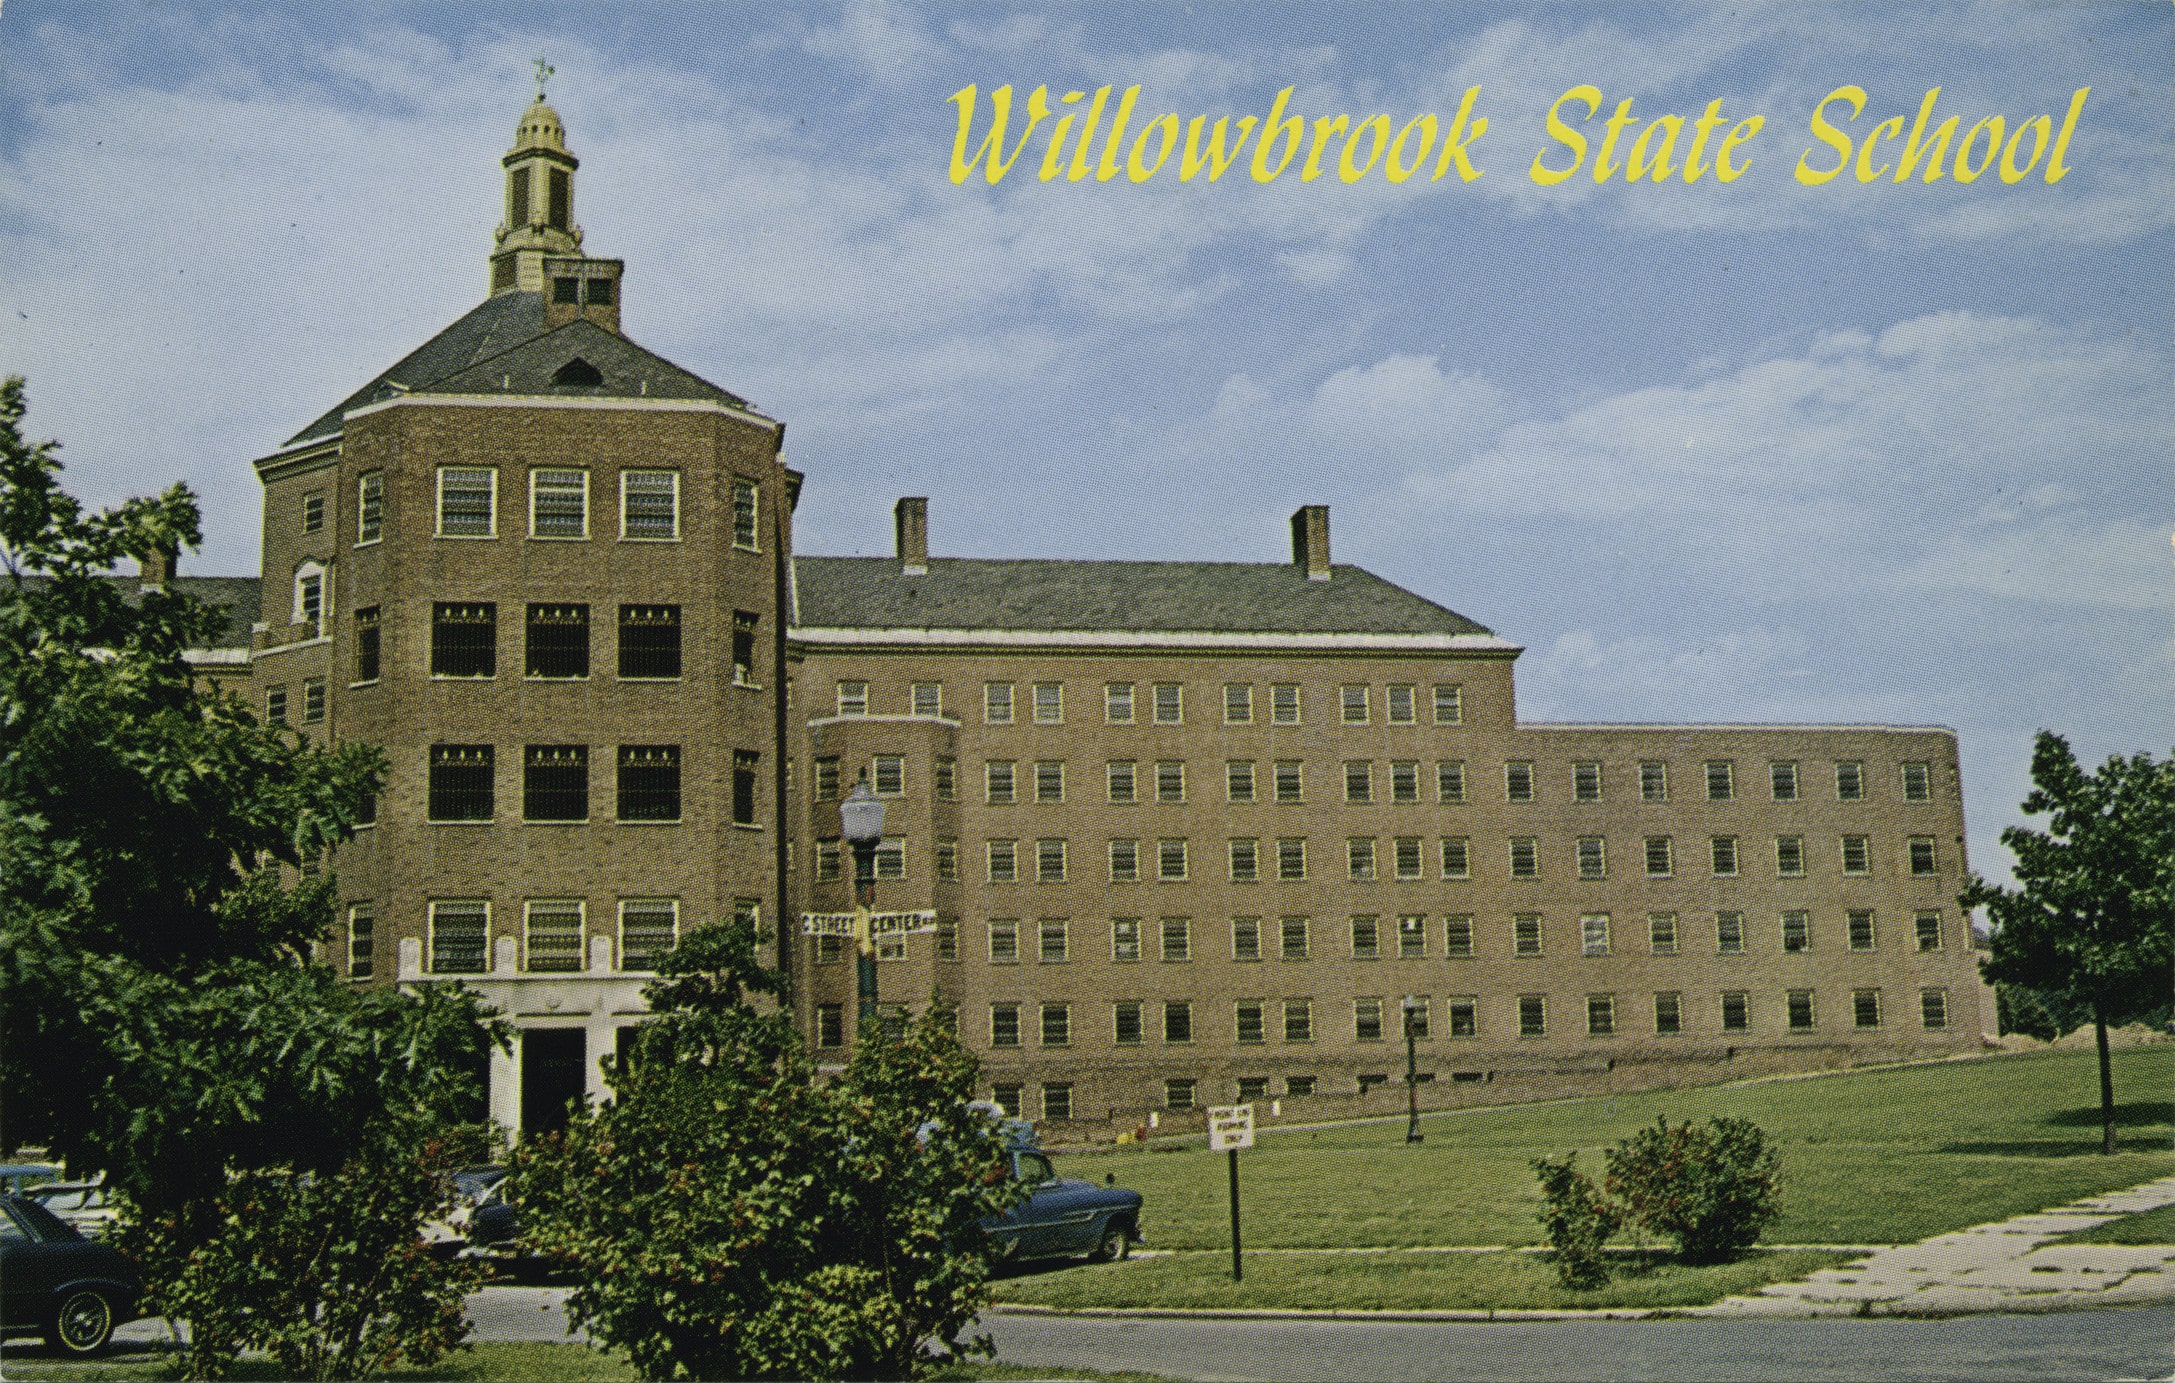 Whillowbrook House School crédit : College of Staten Island/CUNY